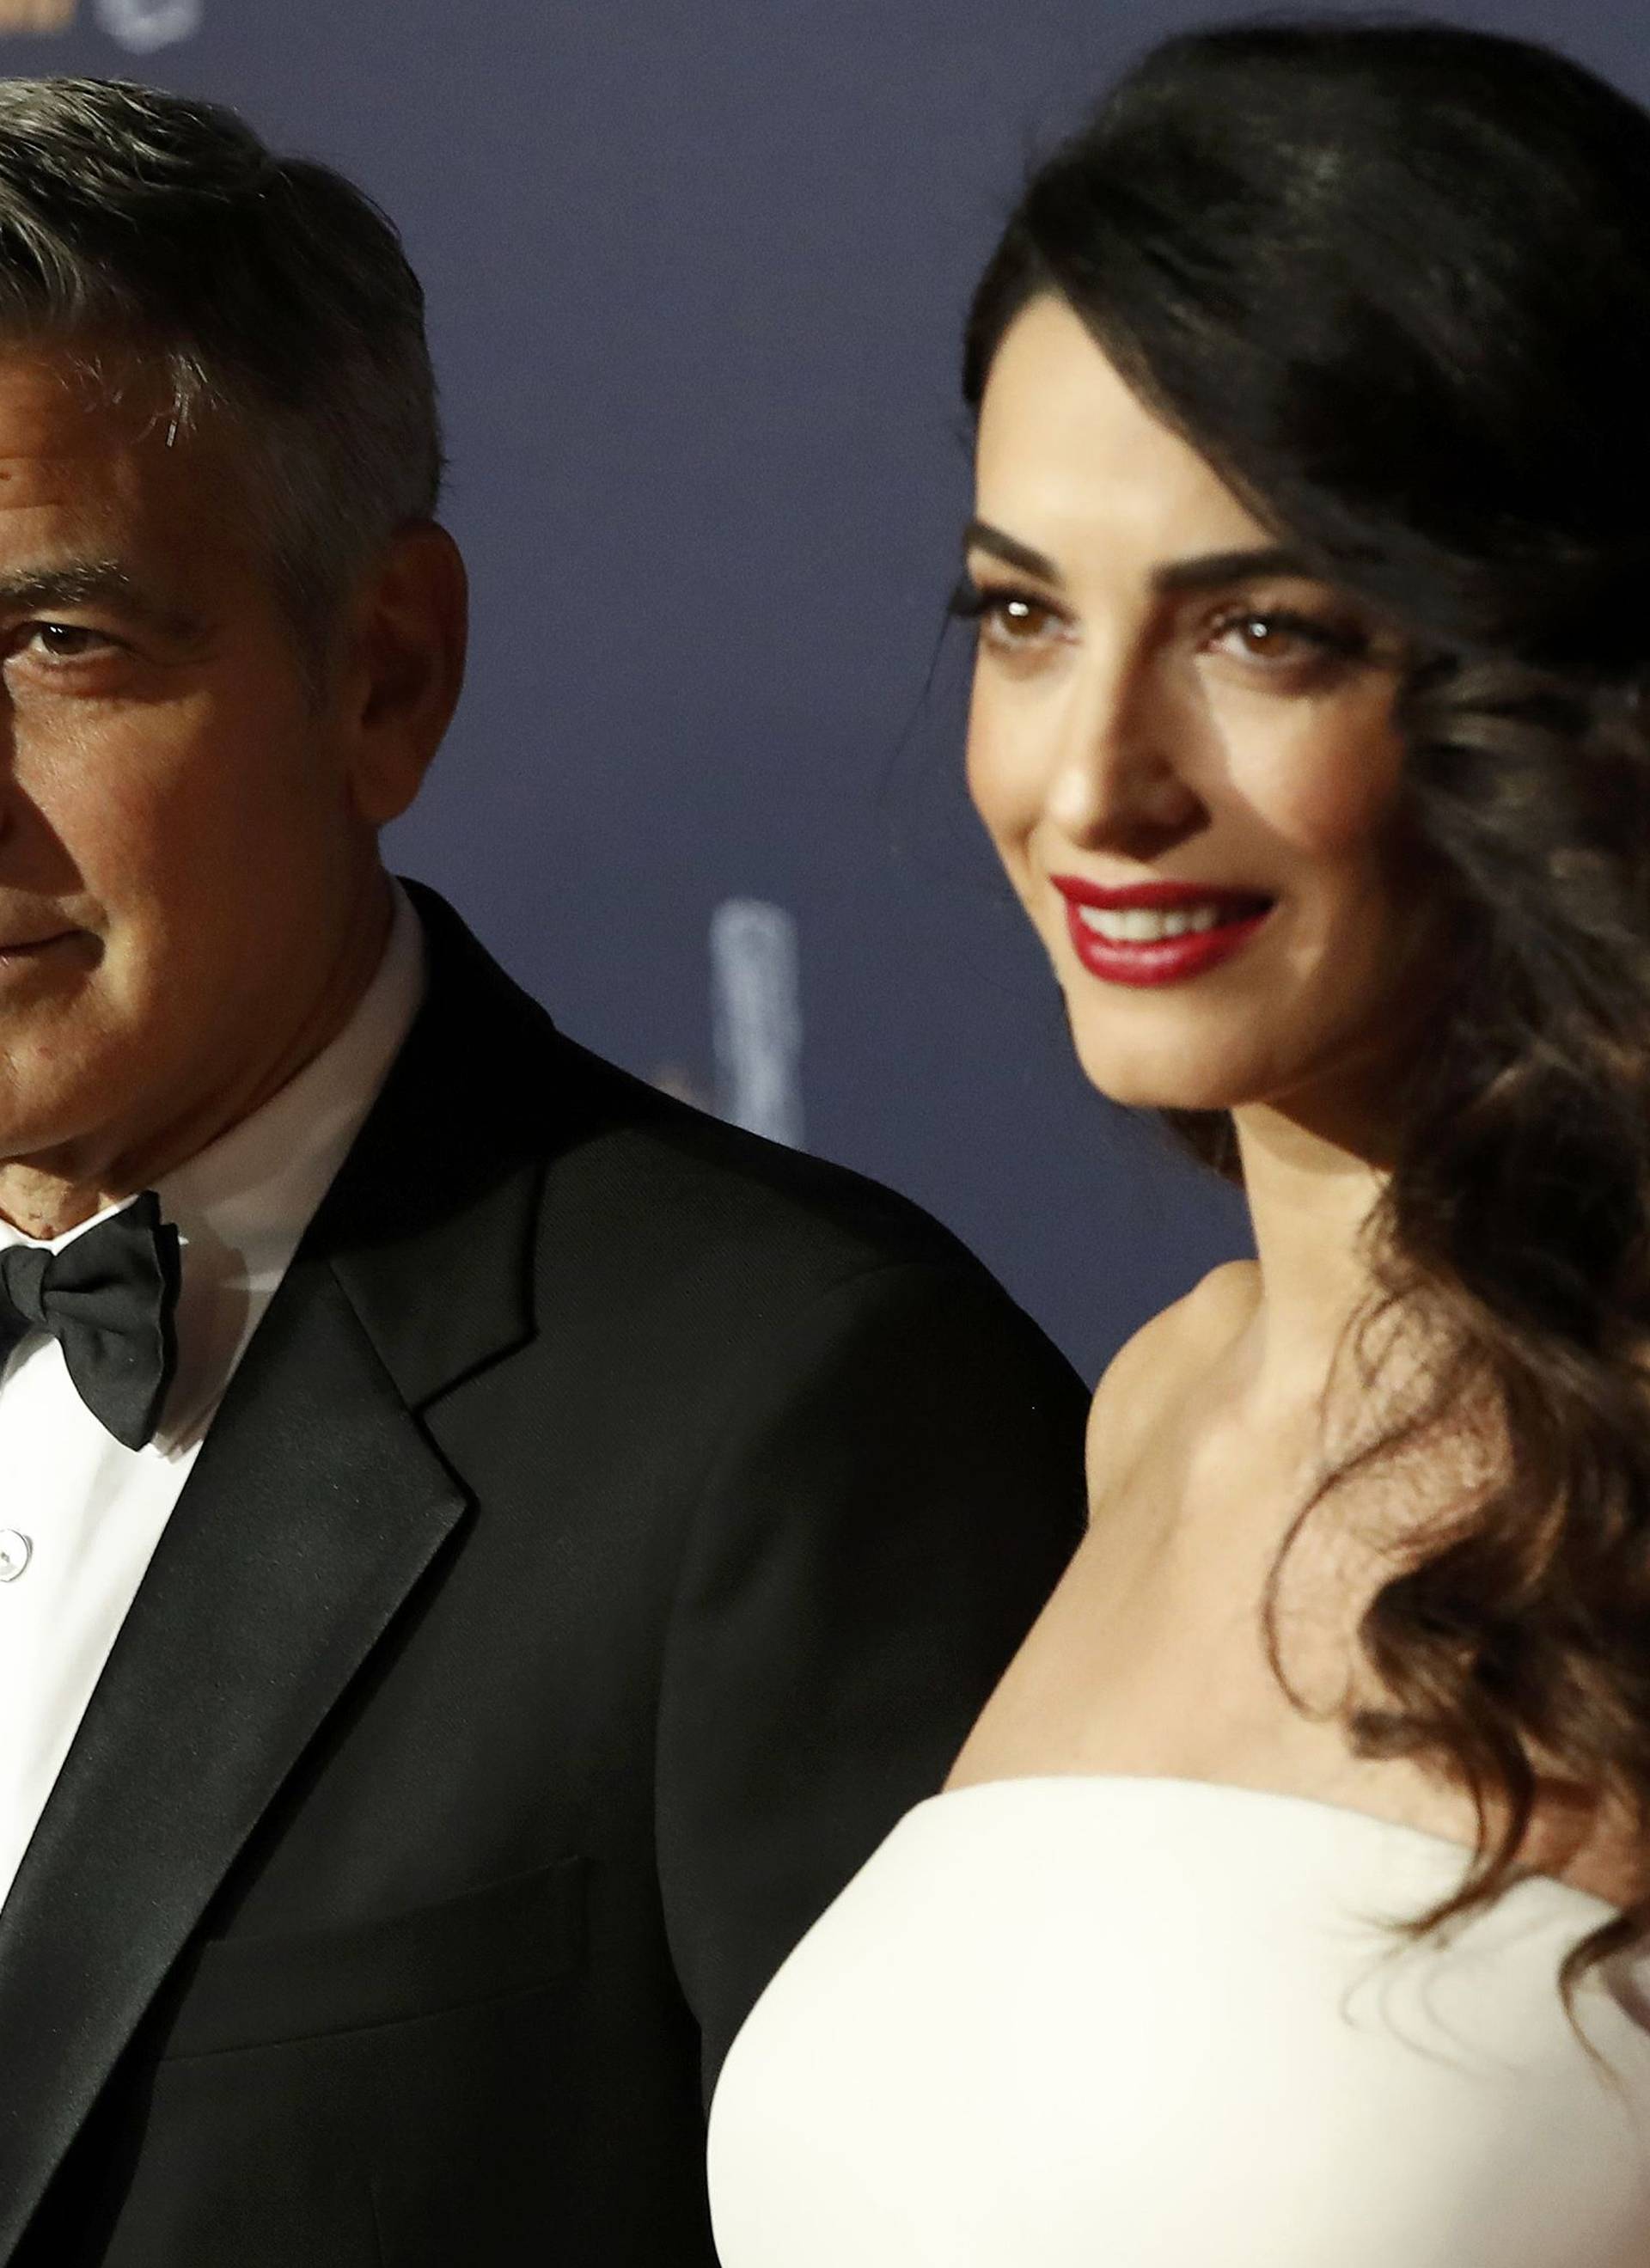 Actor George Clooney and his wife Amal pose as they arrive at the 42nd Cesar Awards ceremony in Paris